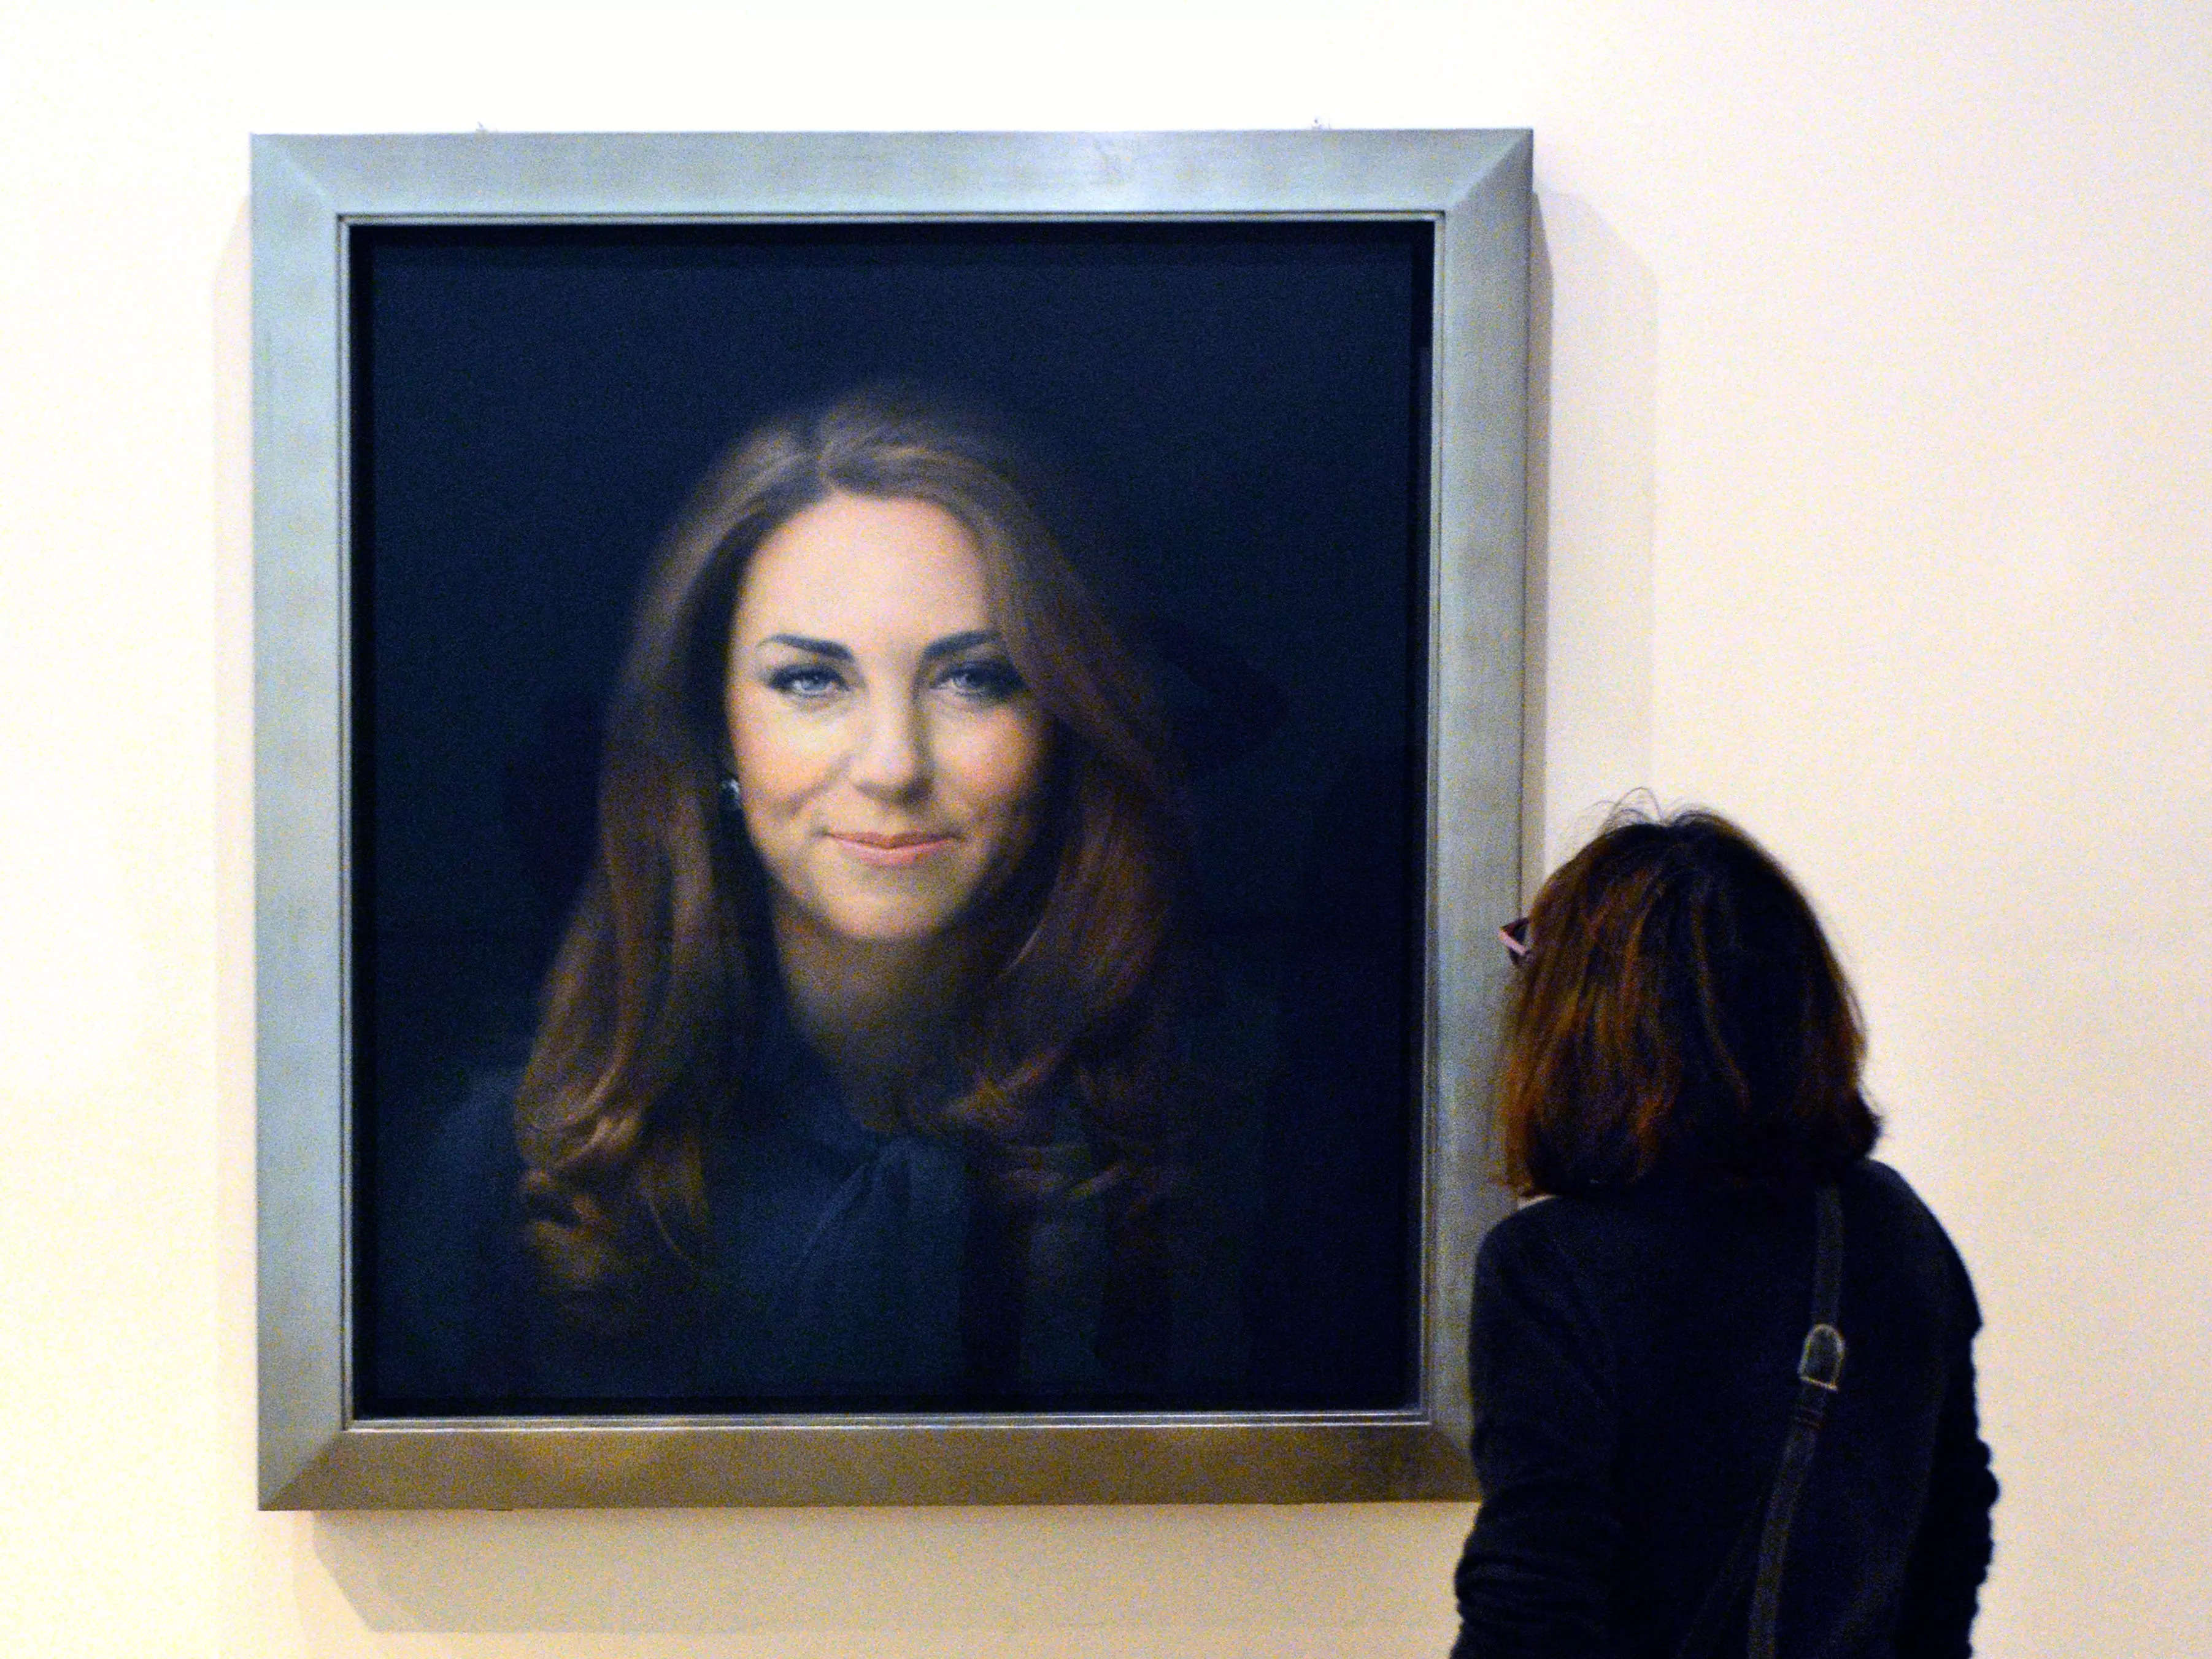 A museum visitor admires a portrait of Catherine, Duchess of Cambridge (Kate MIddleton), at the National Portrait Gallery in London, England. The official portrait was painted by British artist Paul Emsley.